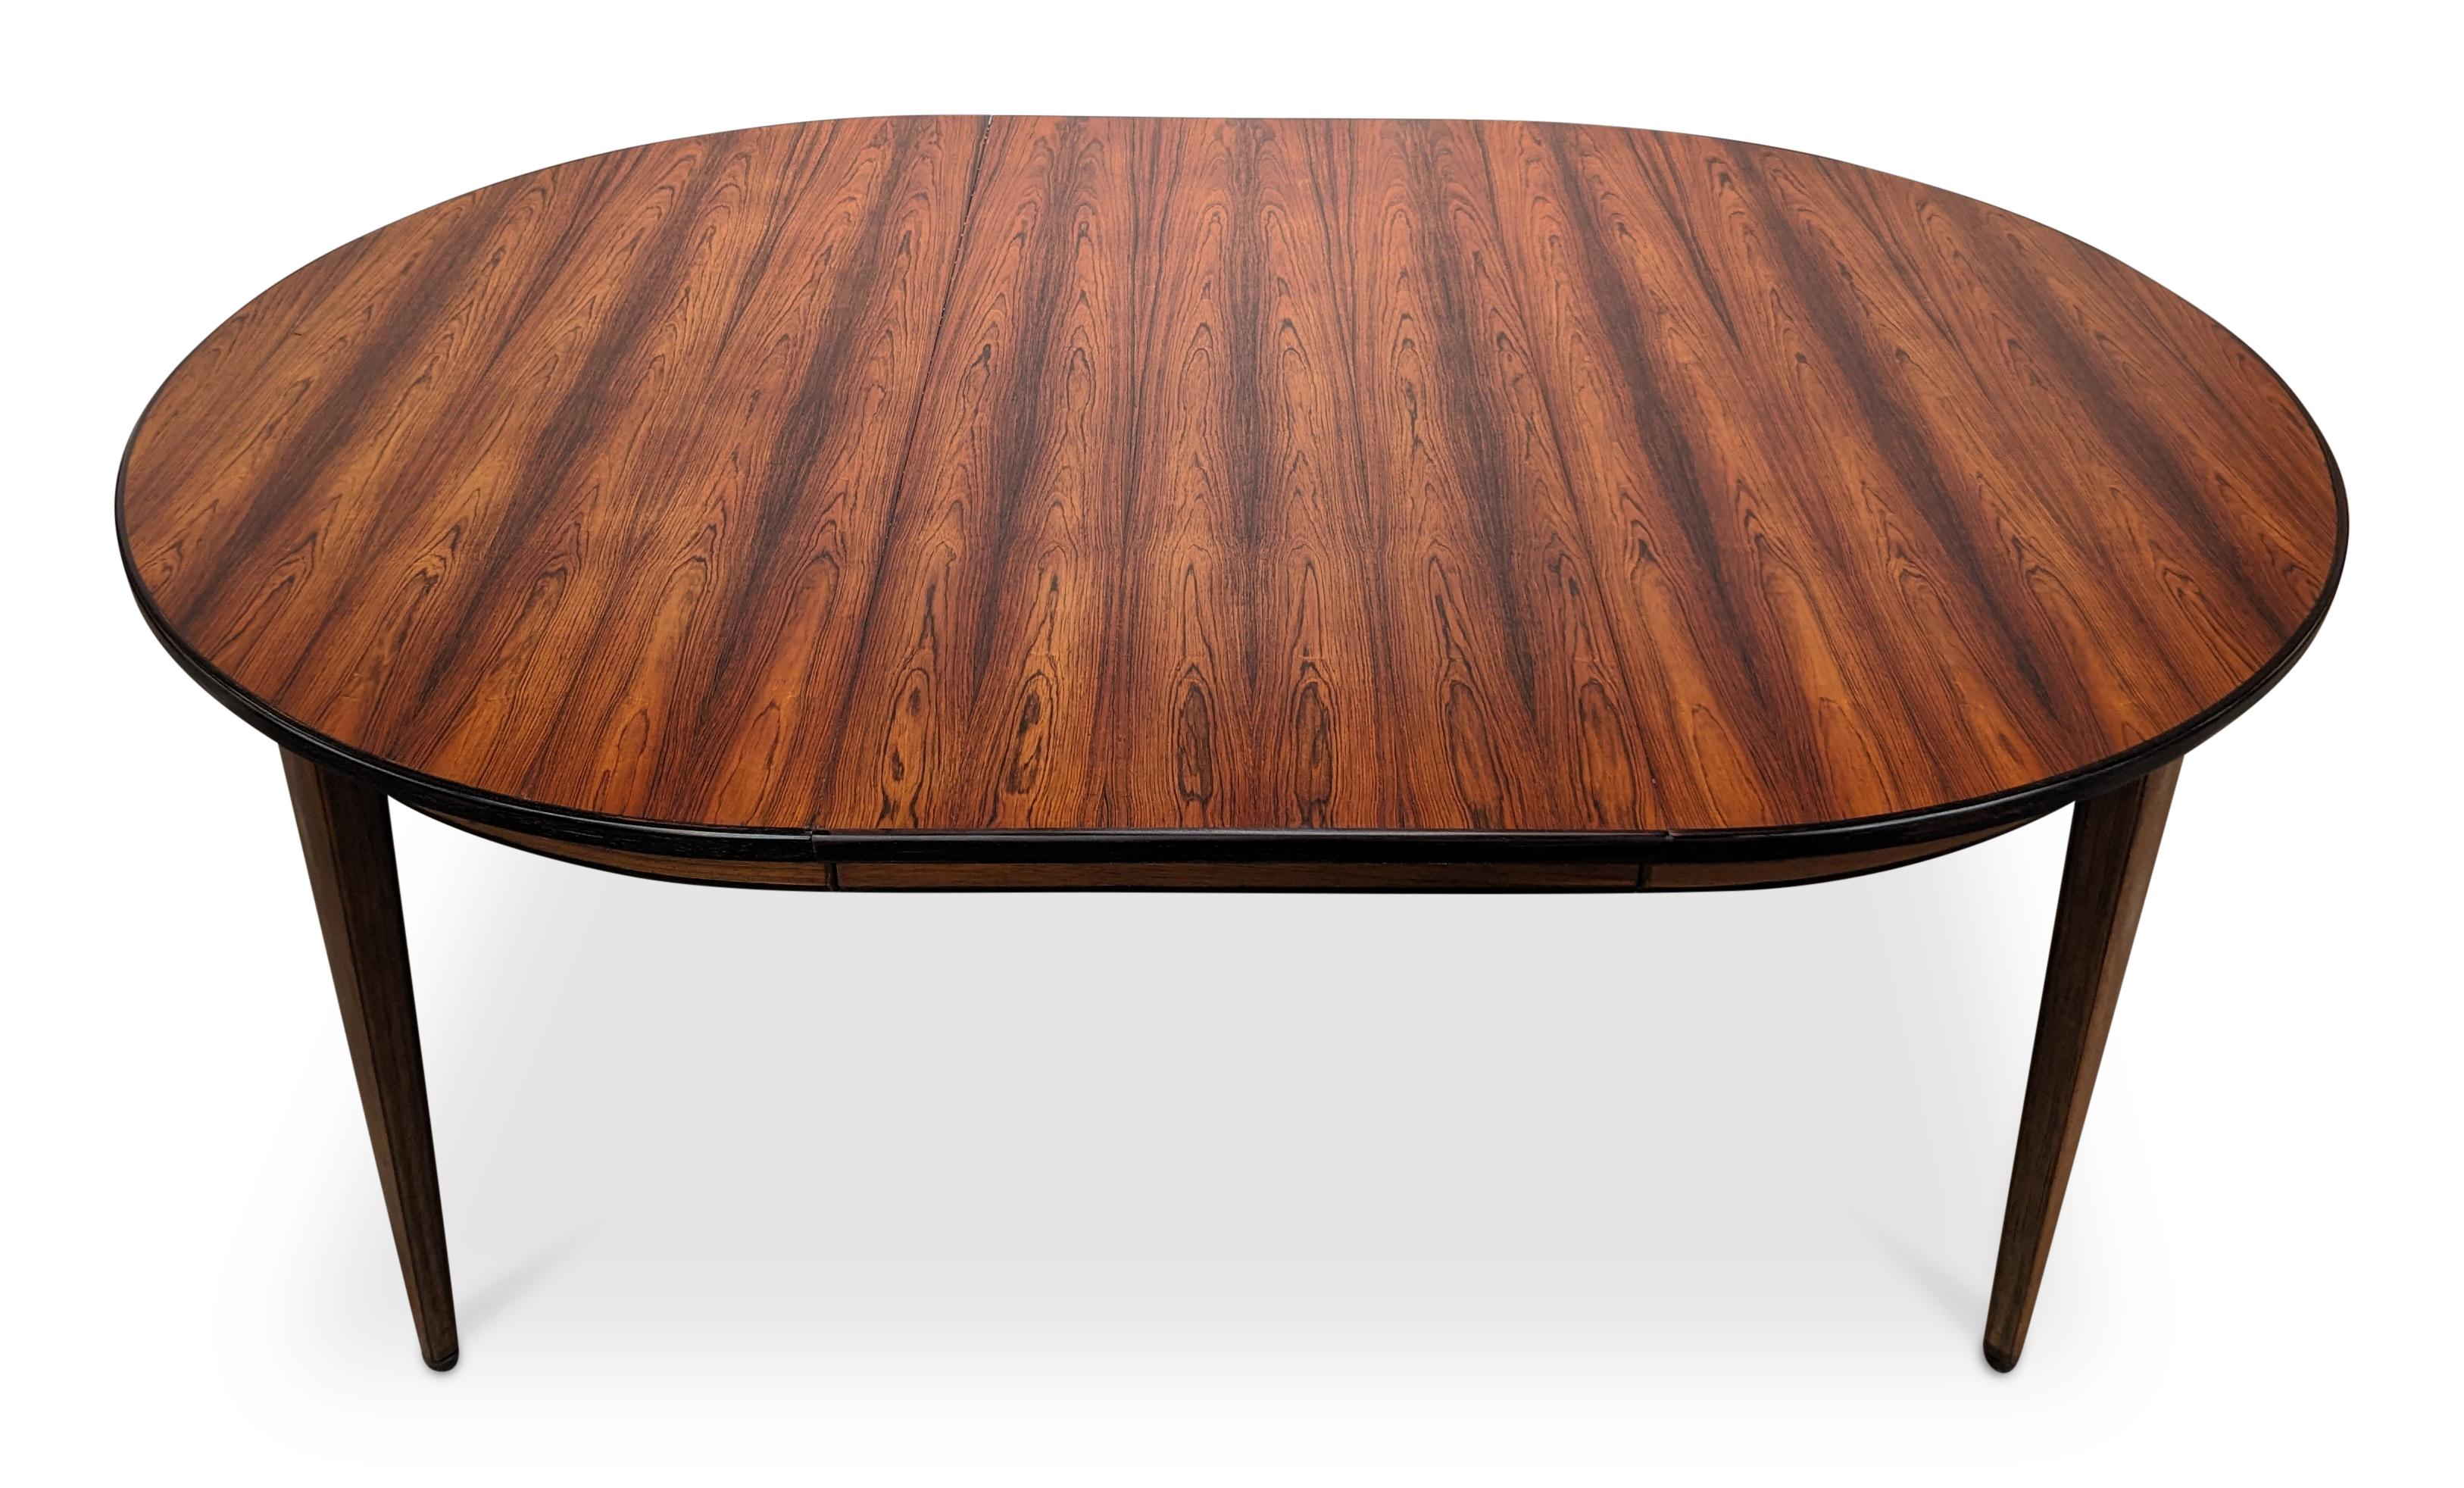 Omann Jun Round Rosewood Table w 1 Leaf - 022433 Vintage Danish Mid Century In Good Condition In Brooklyn, NY